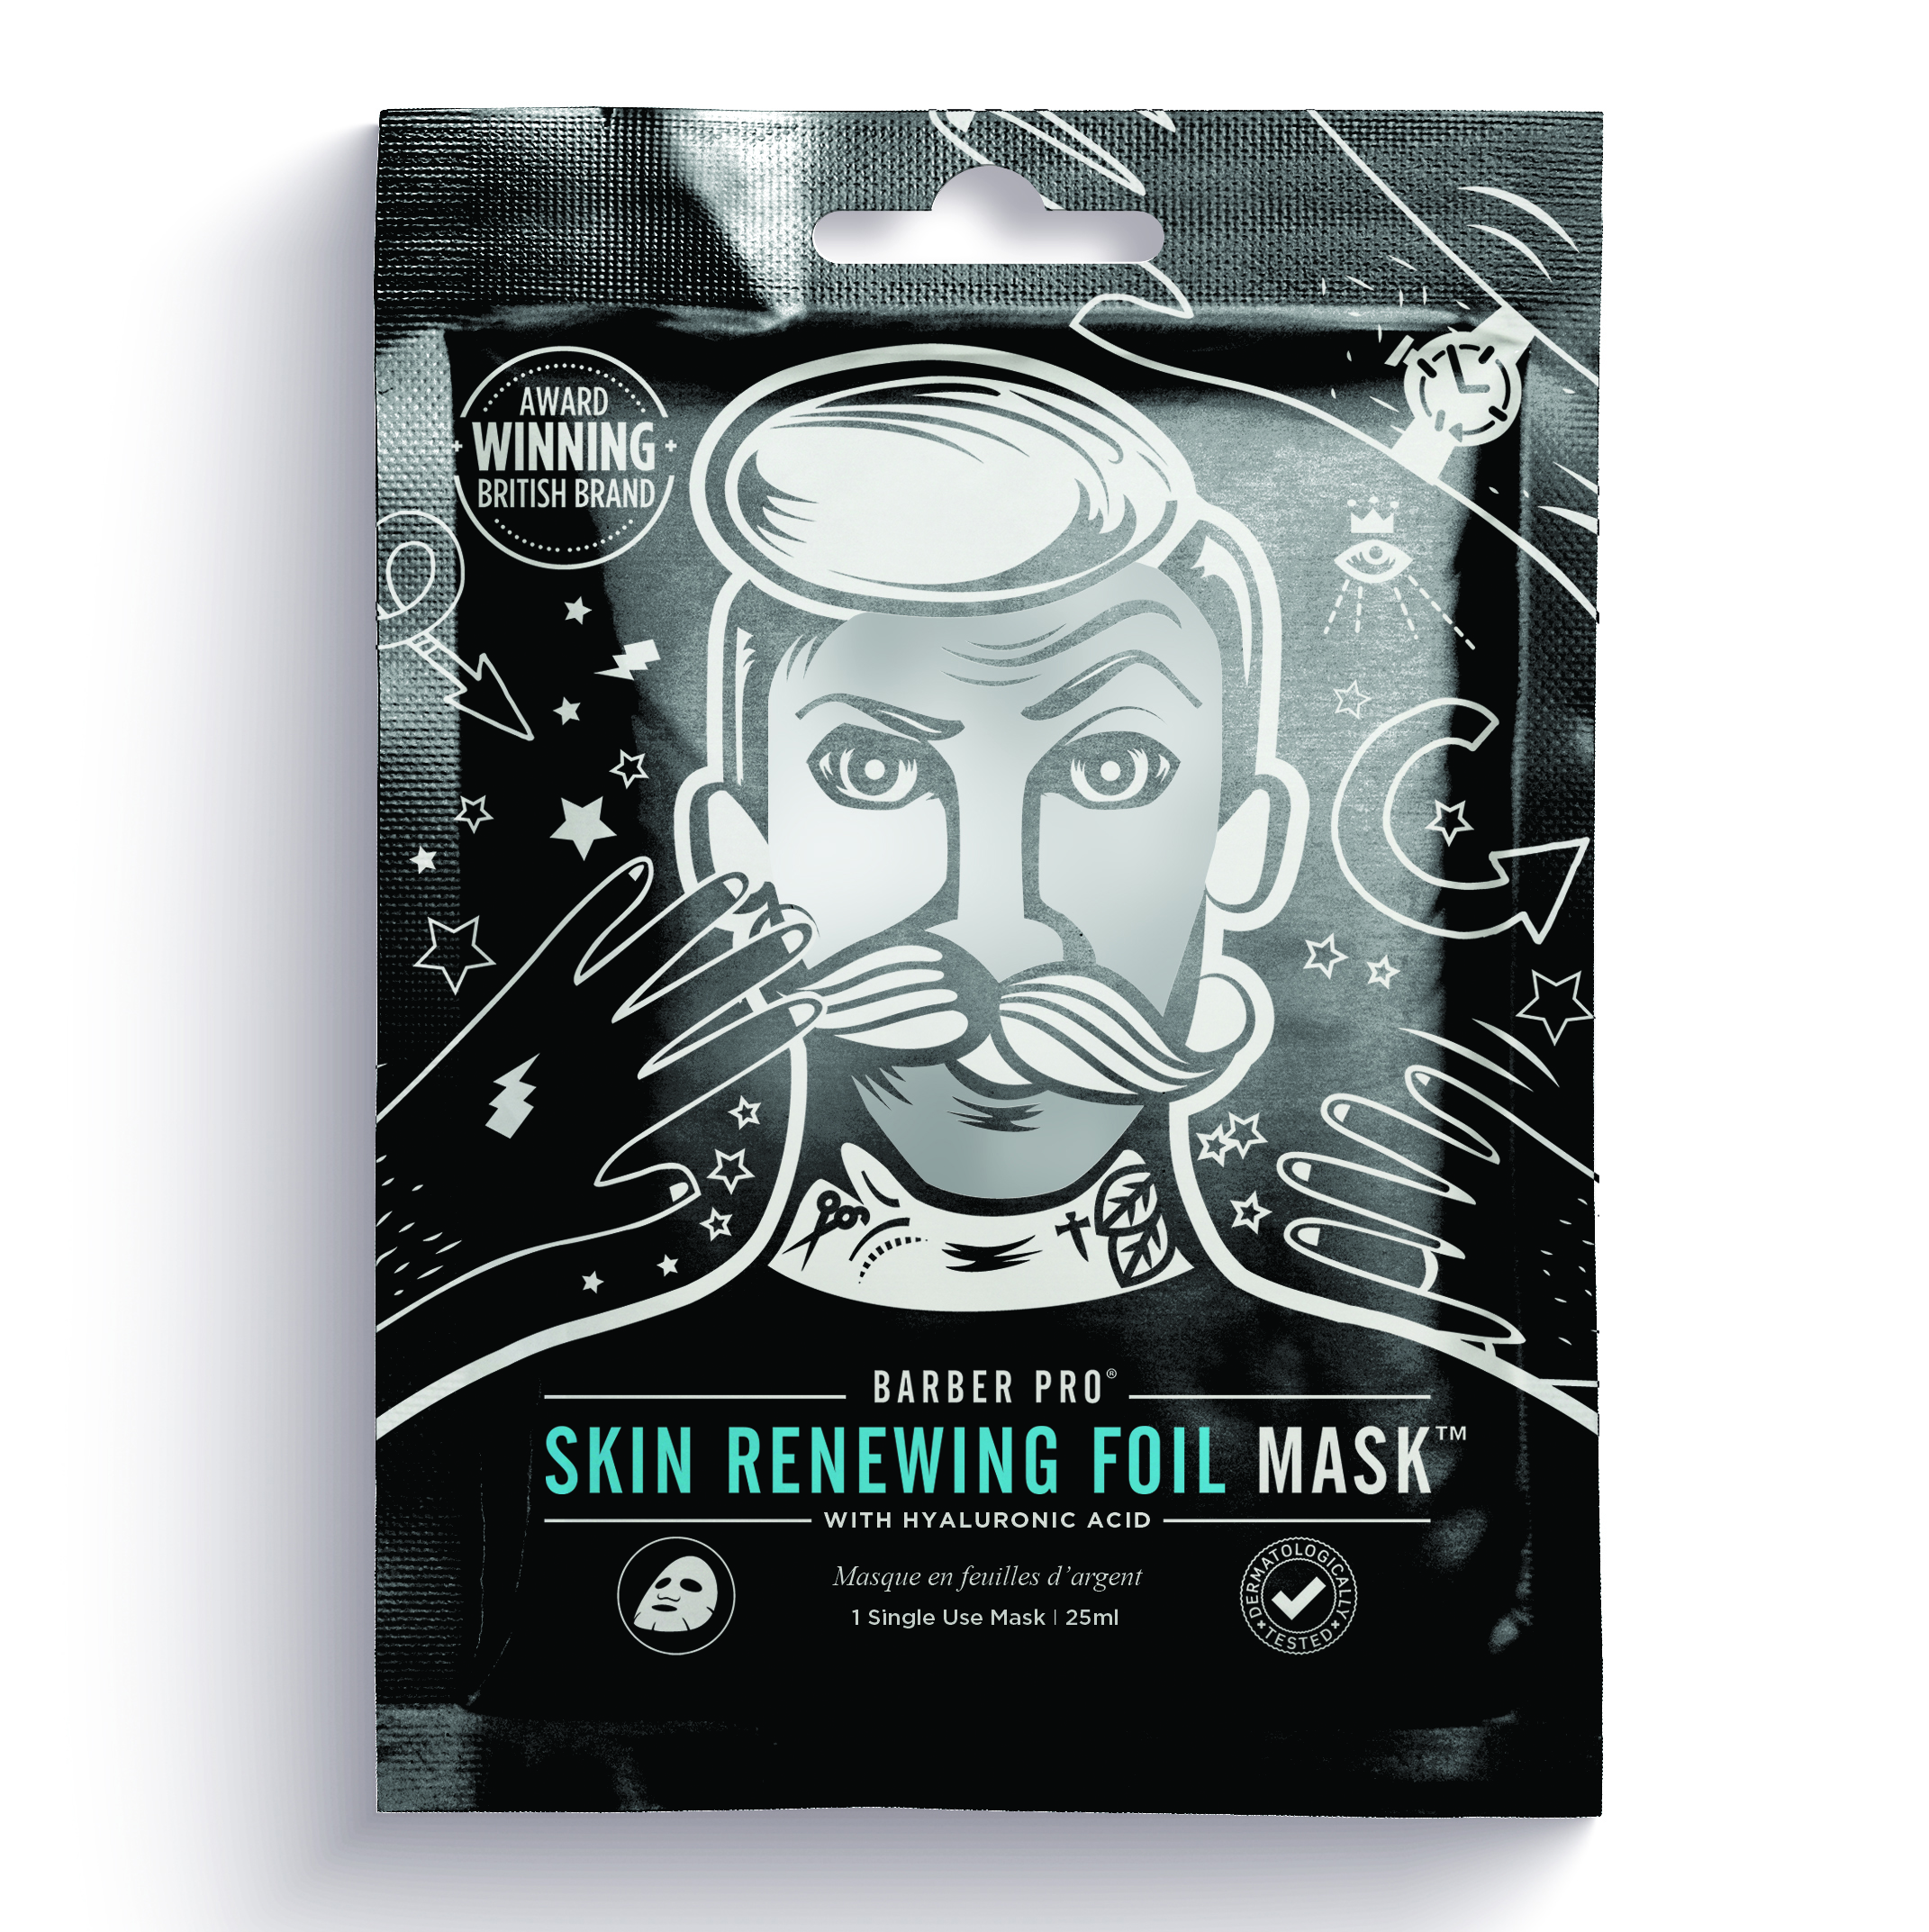 Barber Pro's Skin Renewing Foil Mask with Hyaluronic Acid & Q10 